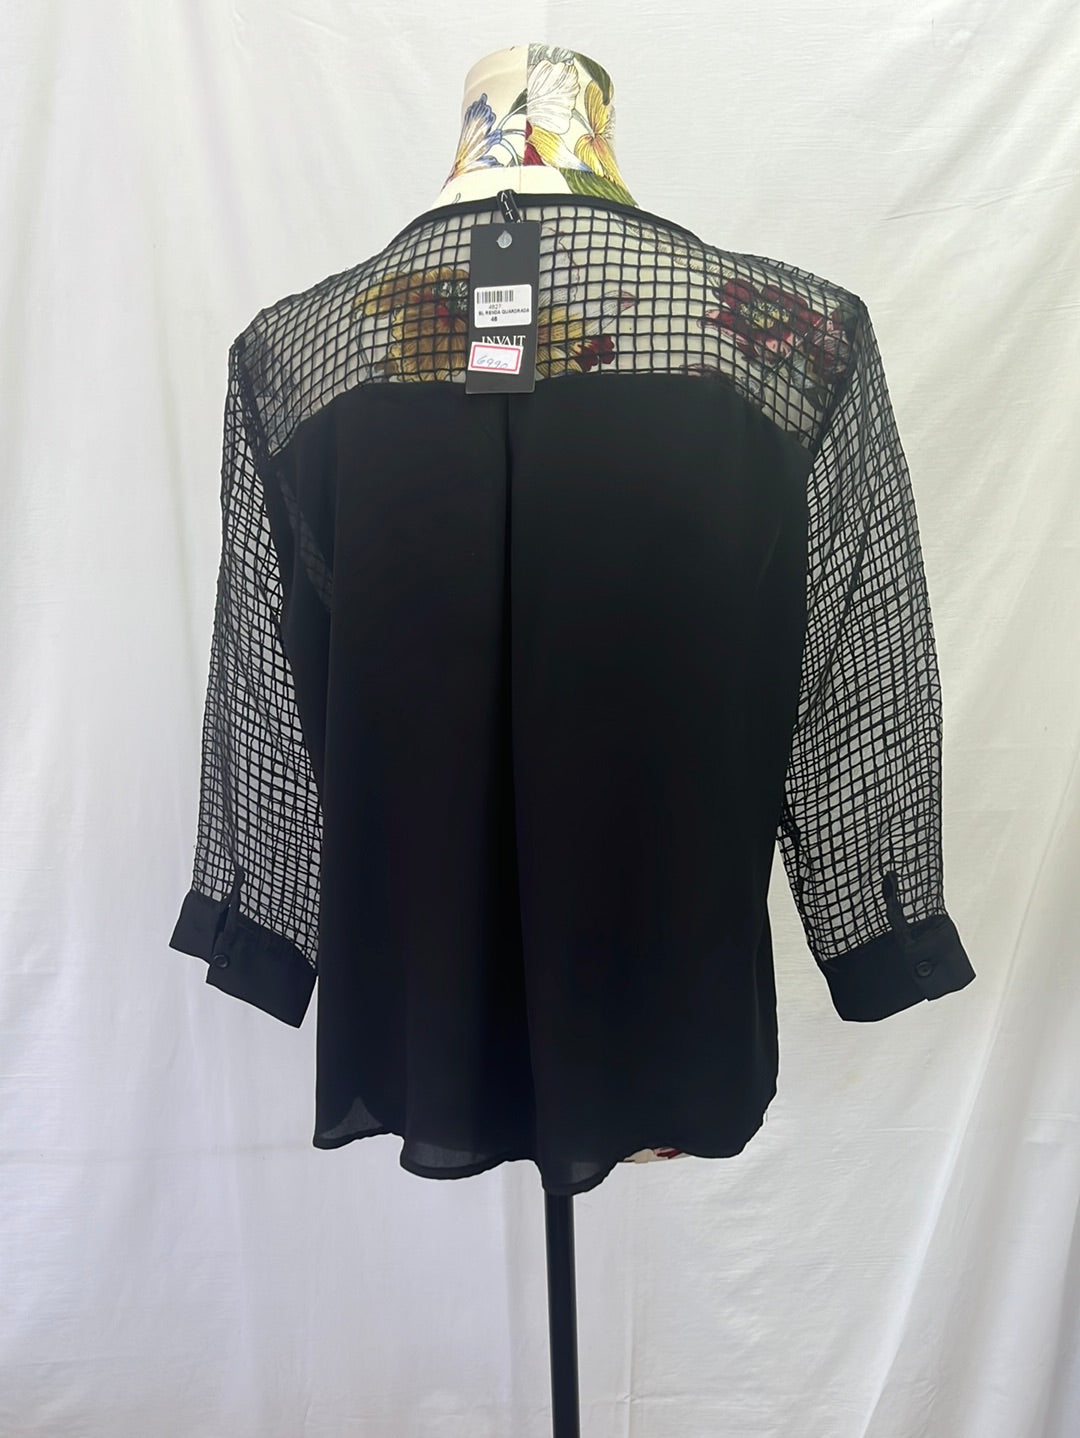 NWT -- INVAIT Black Blouse with Sheer Sleeves and Collar -- 42